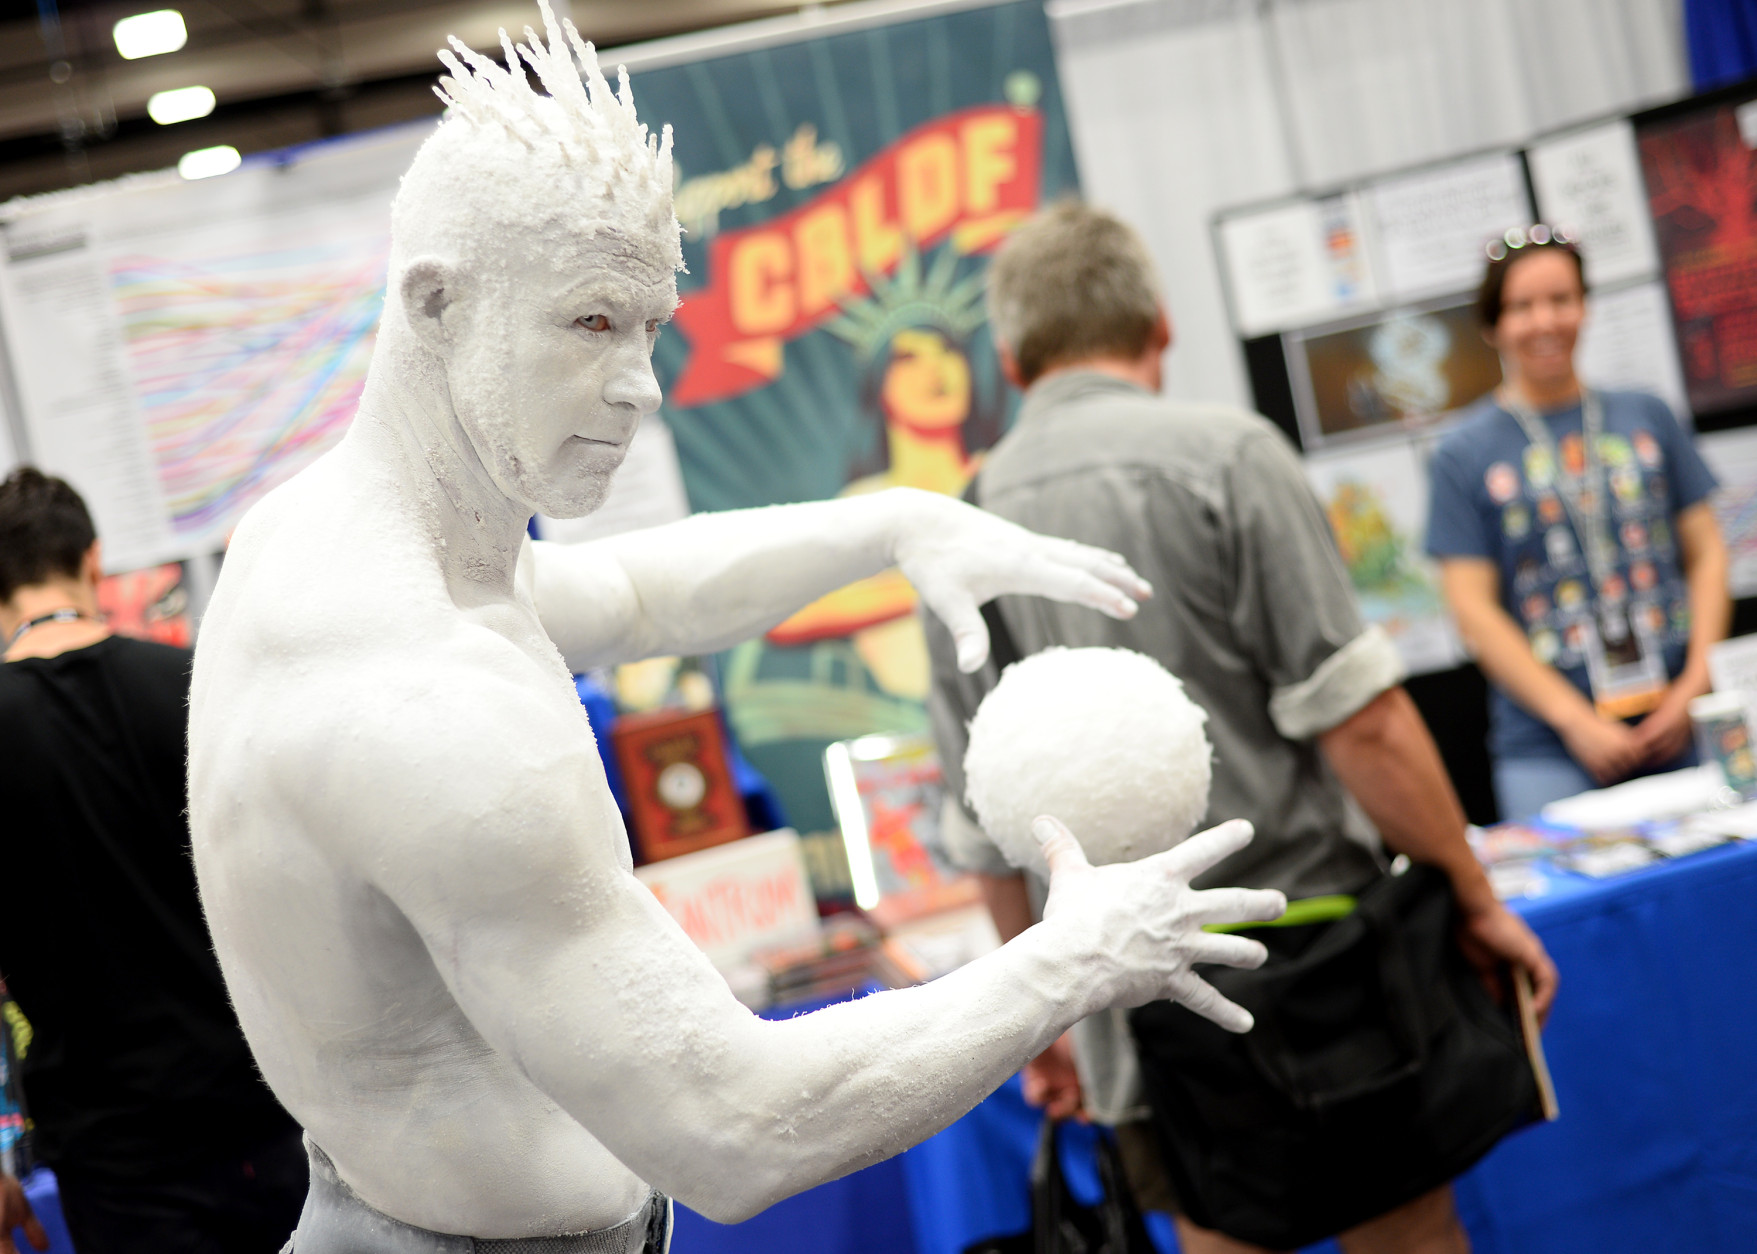 Todd Schmidt, of San Diego, dressed as the Iceman, attends on day 2 of Comic-Con International on Friday, July 22, 2016, in San Diego. (Photo by Al Powers/Invision/AP)